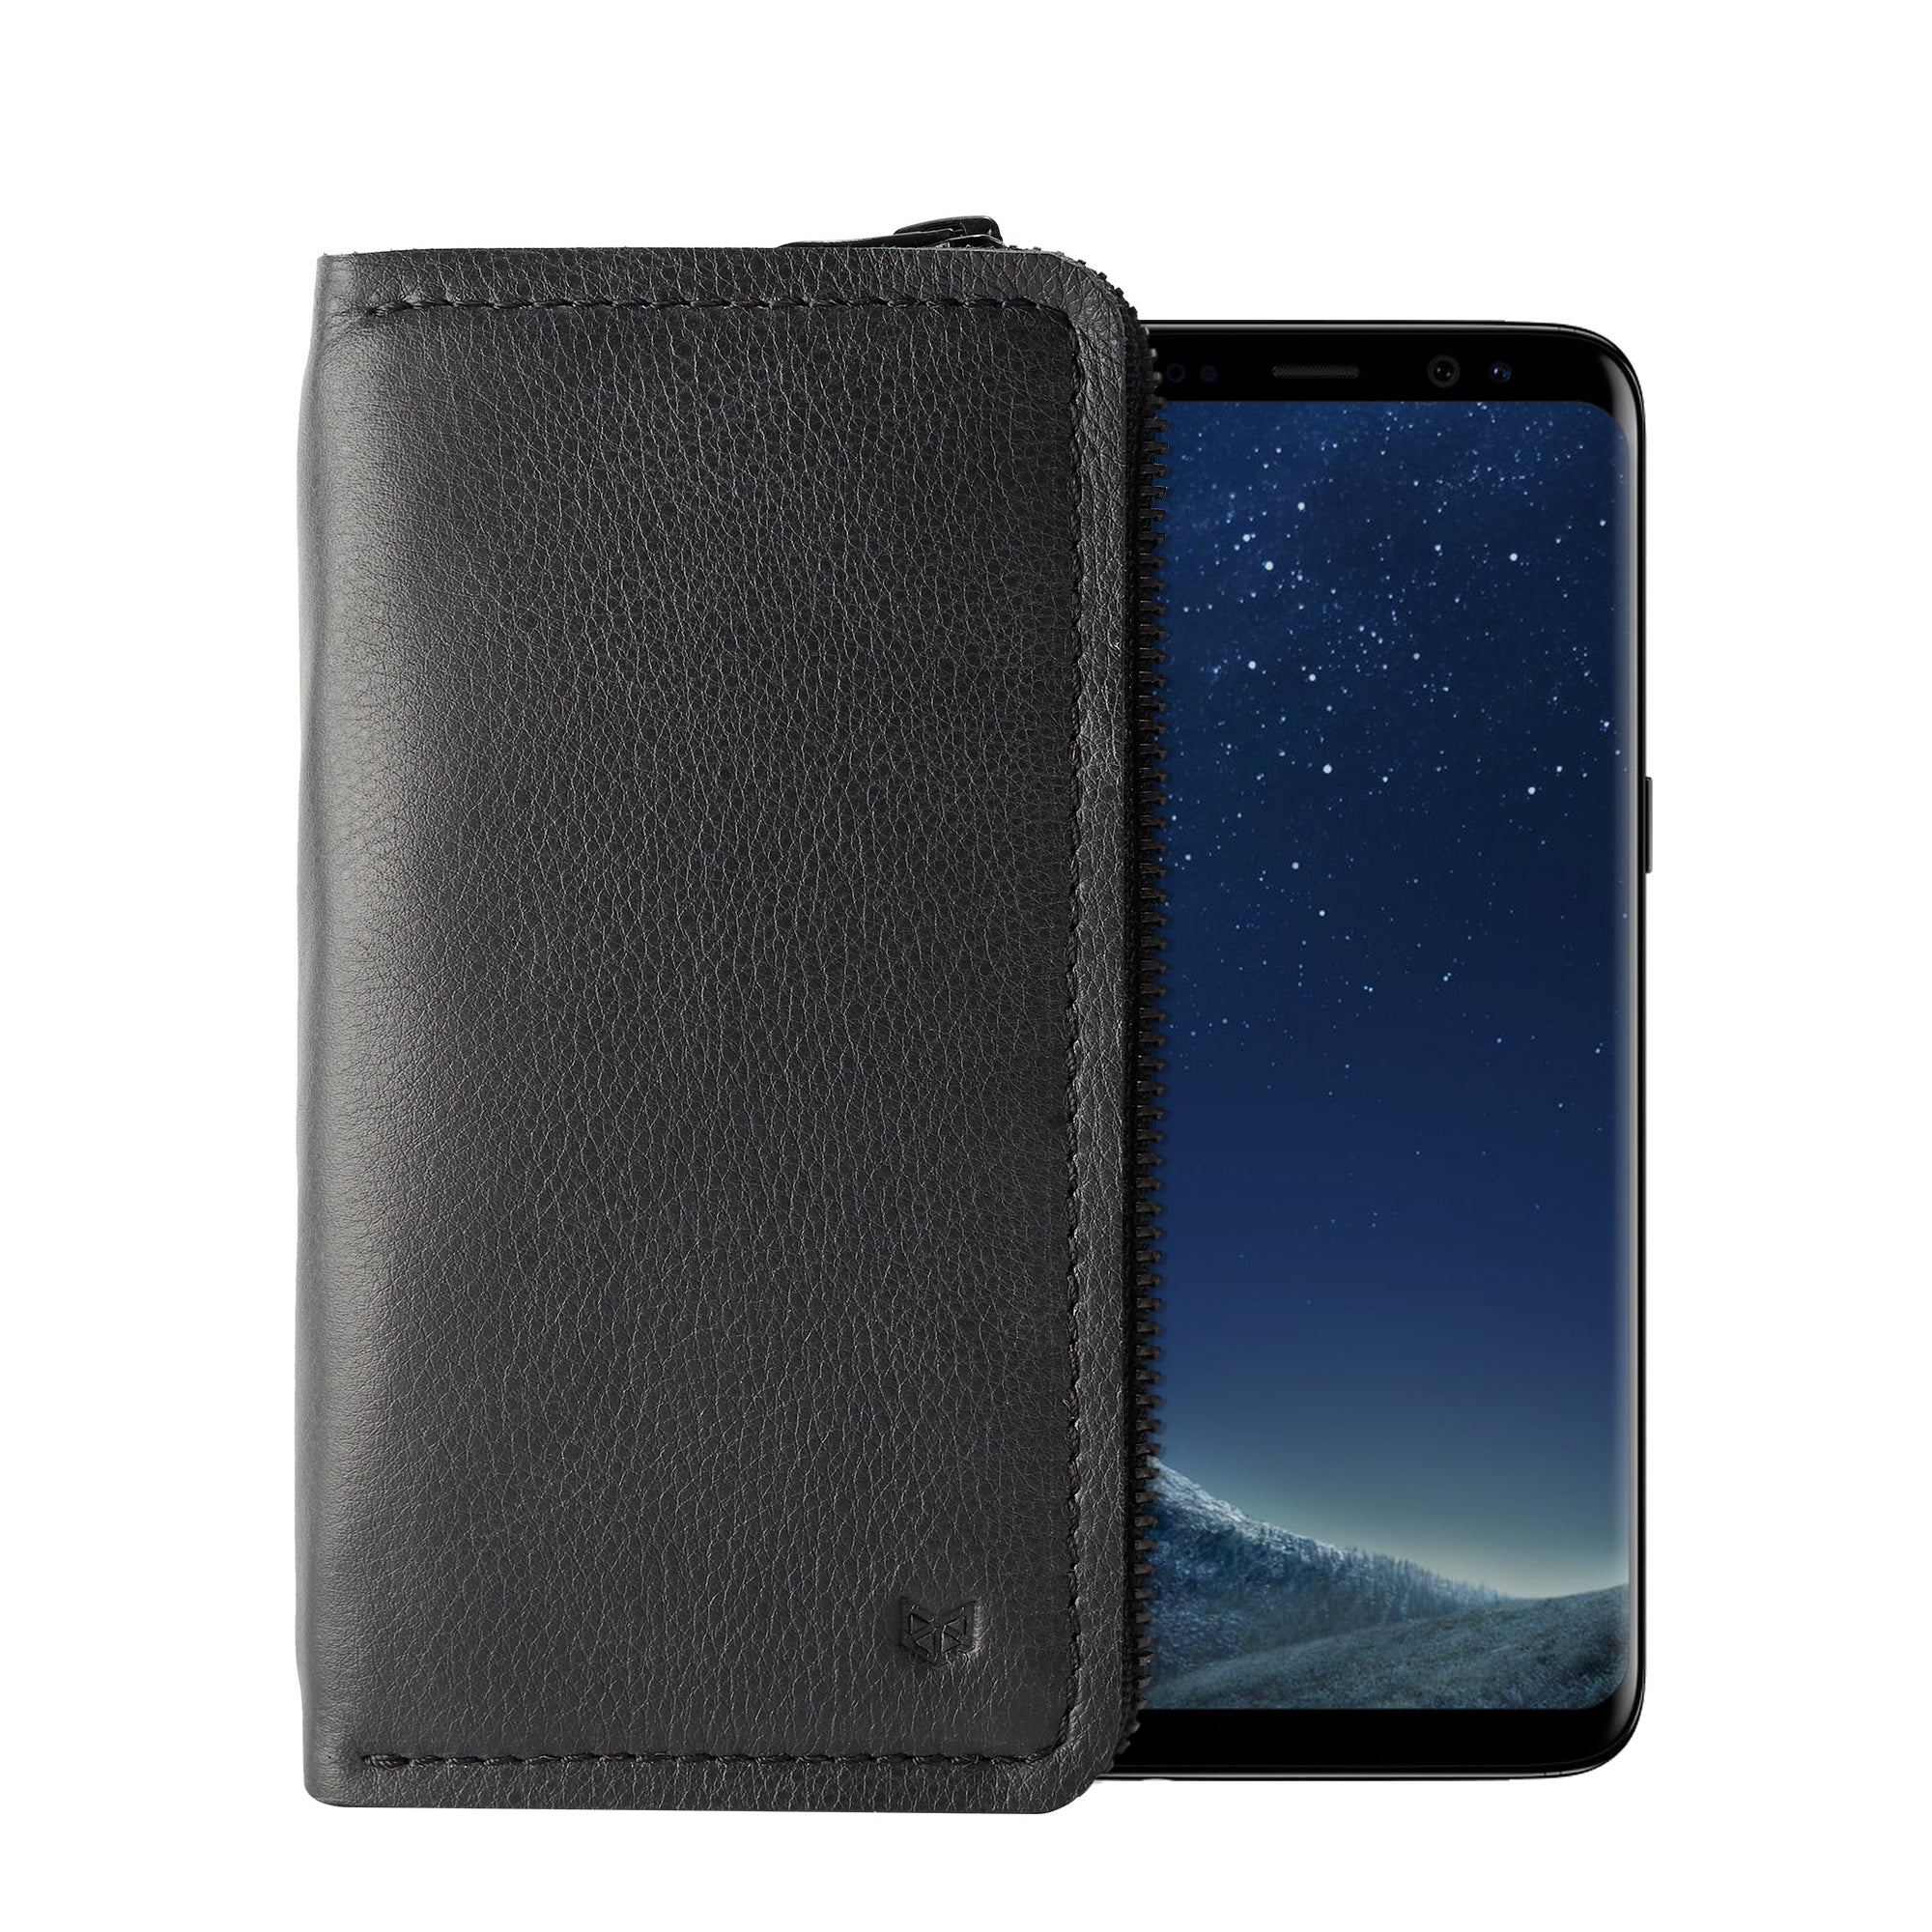 Cover. Black handcrafted leather stand case for the Samsung Galaxy S8 and S8 Plus. Samsung sleeve wallet with card holder